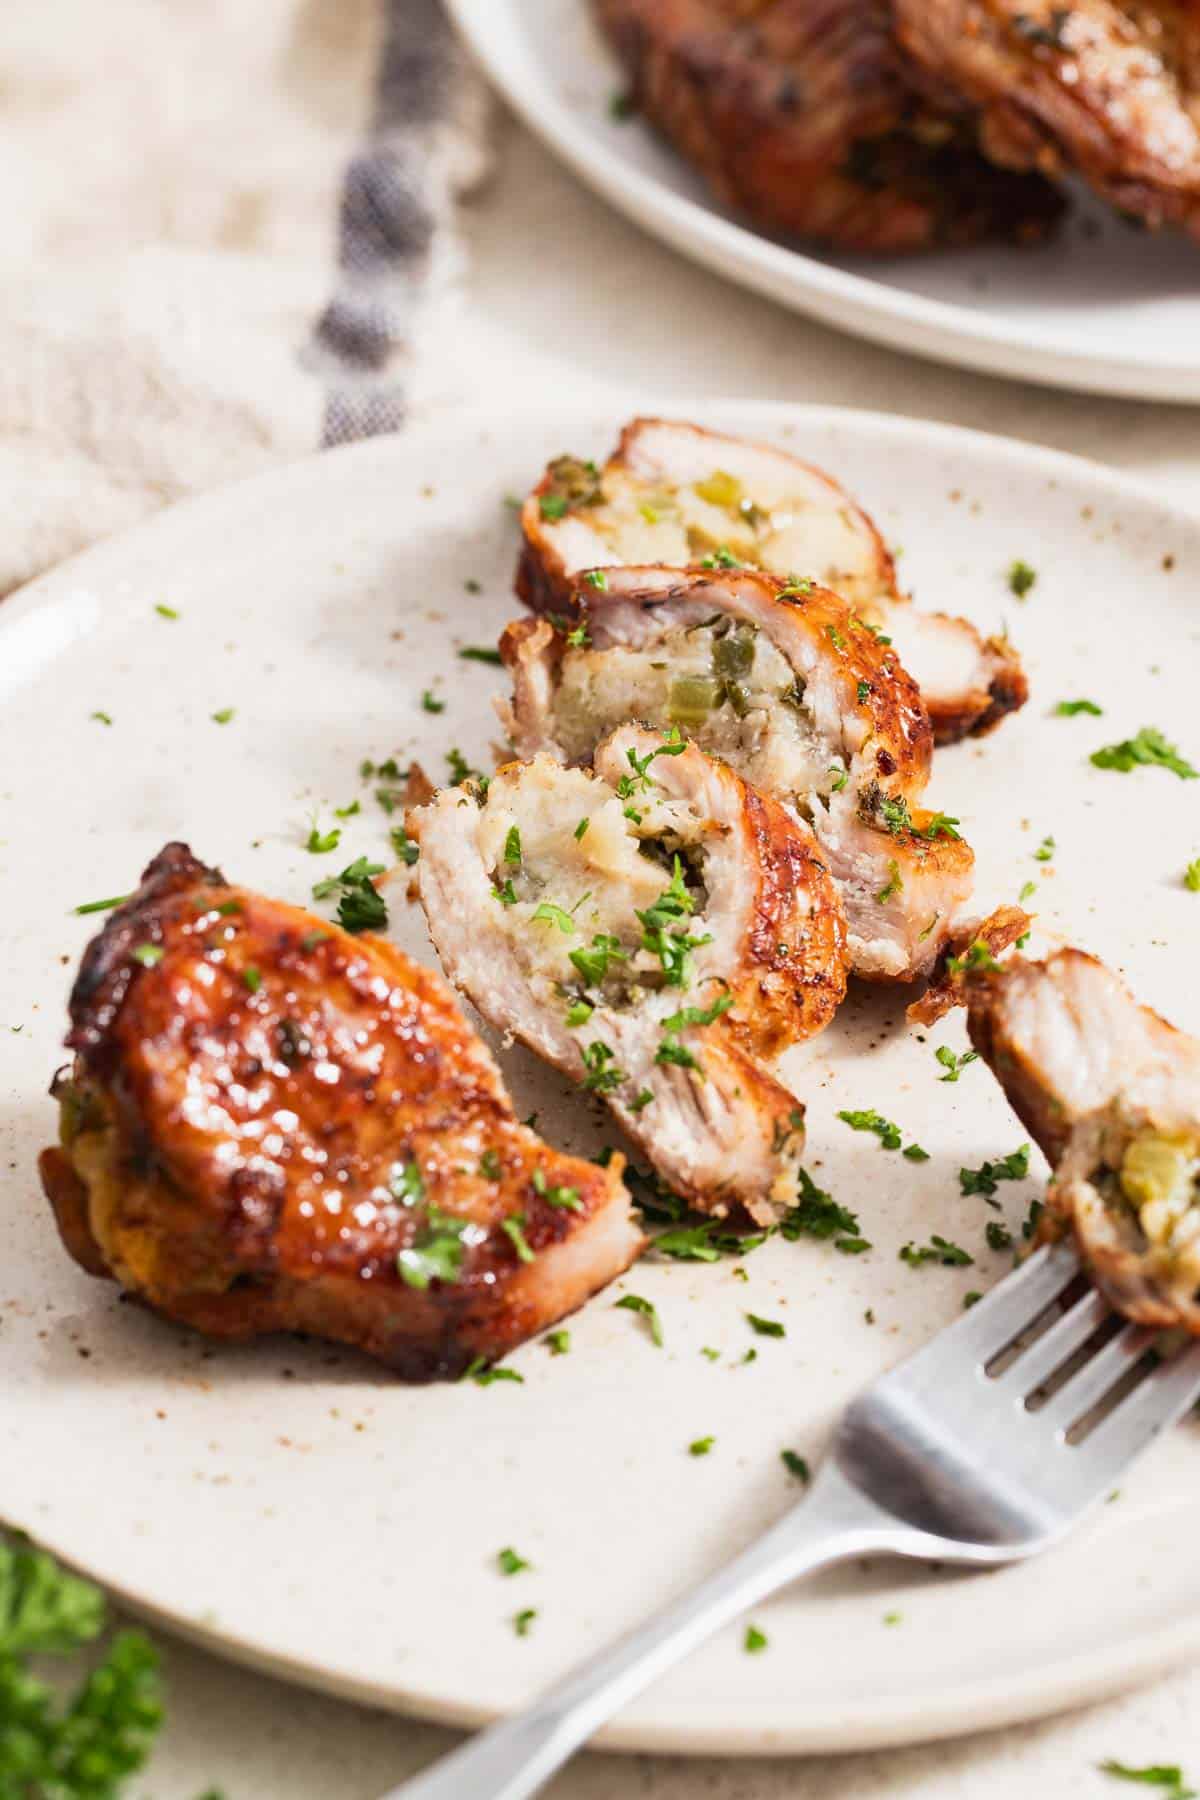 Golden brown sliced pork chops stuffed with a bread filling.